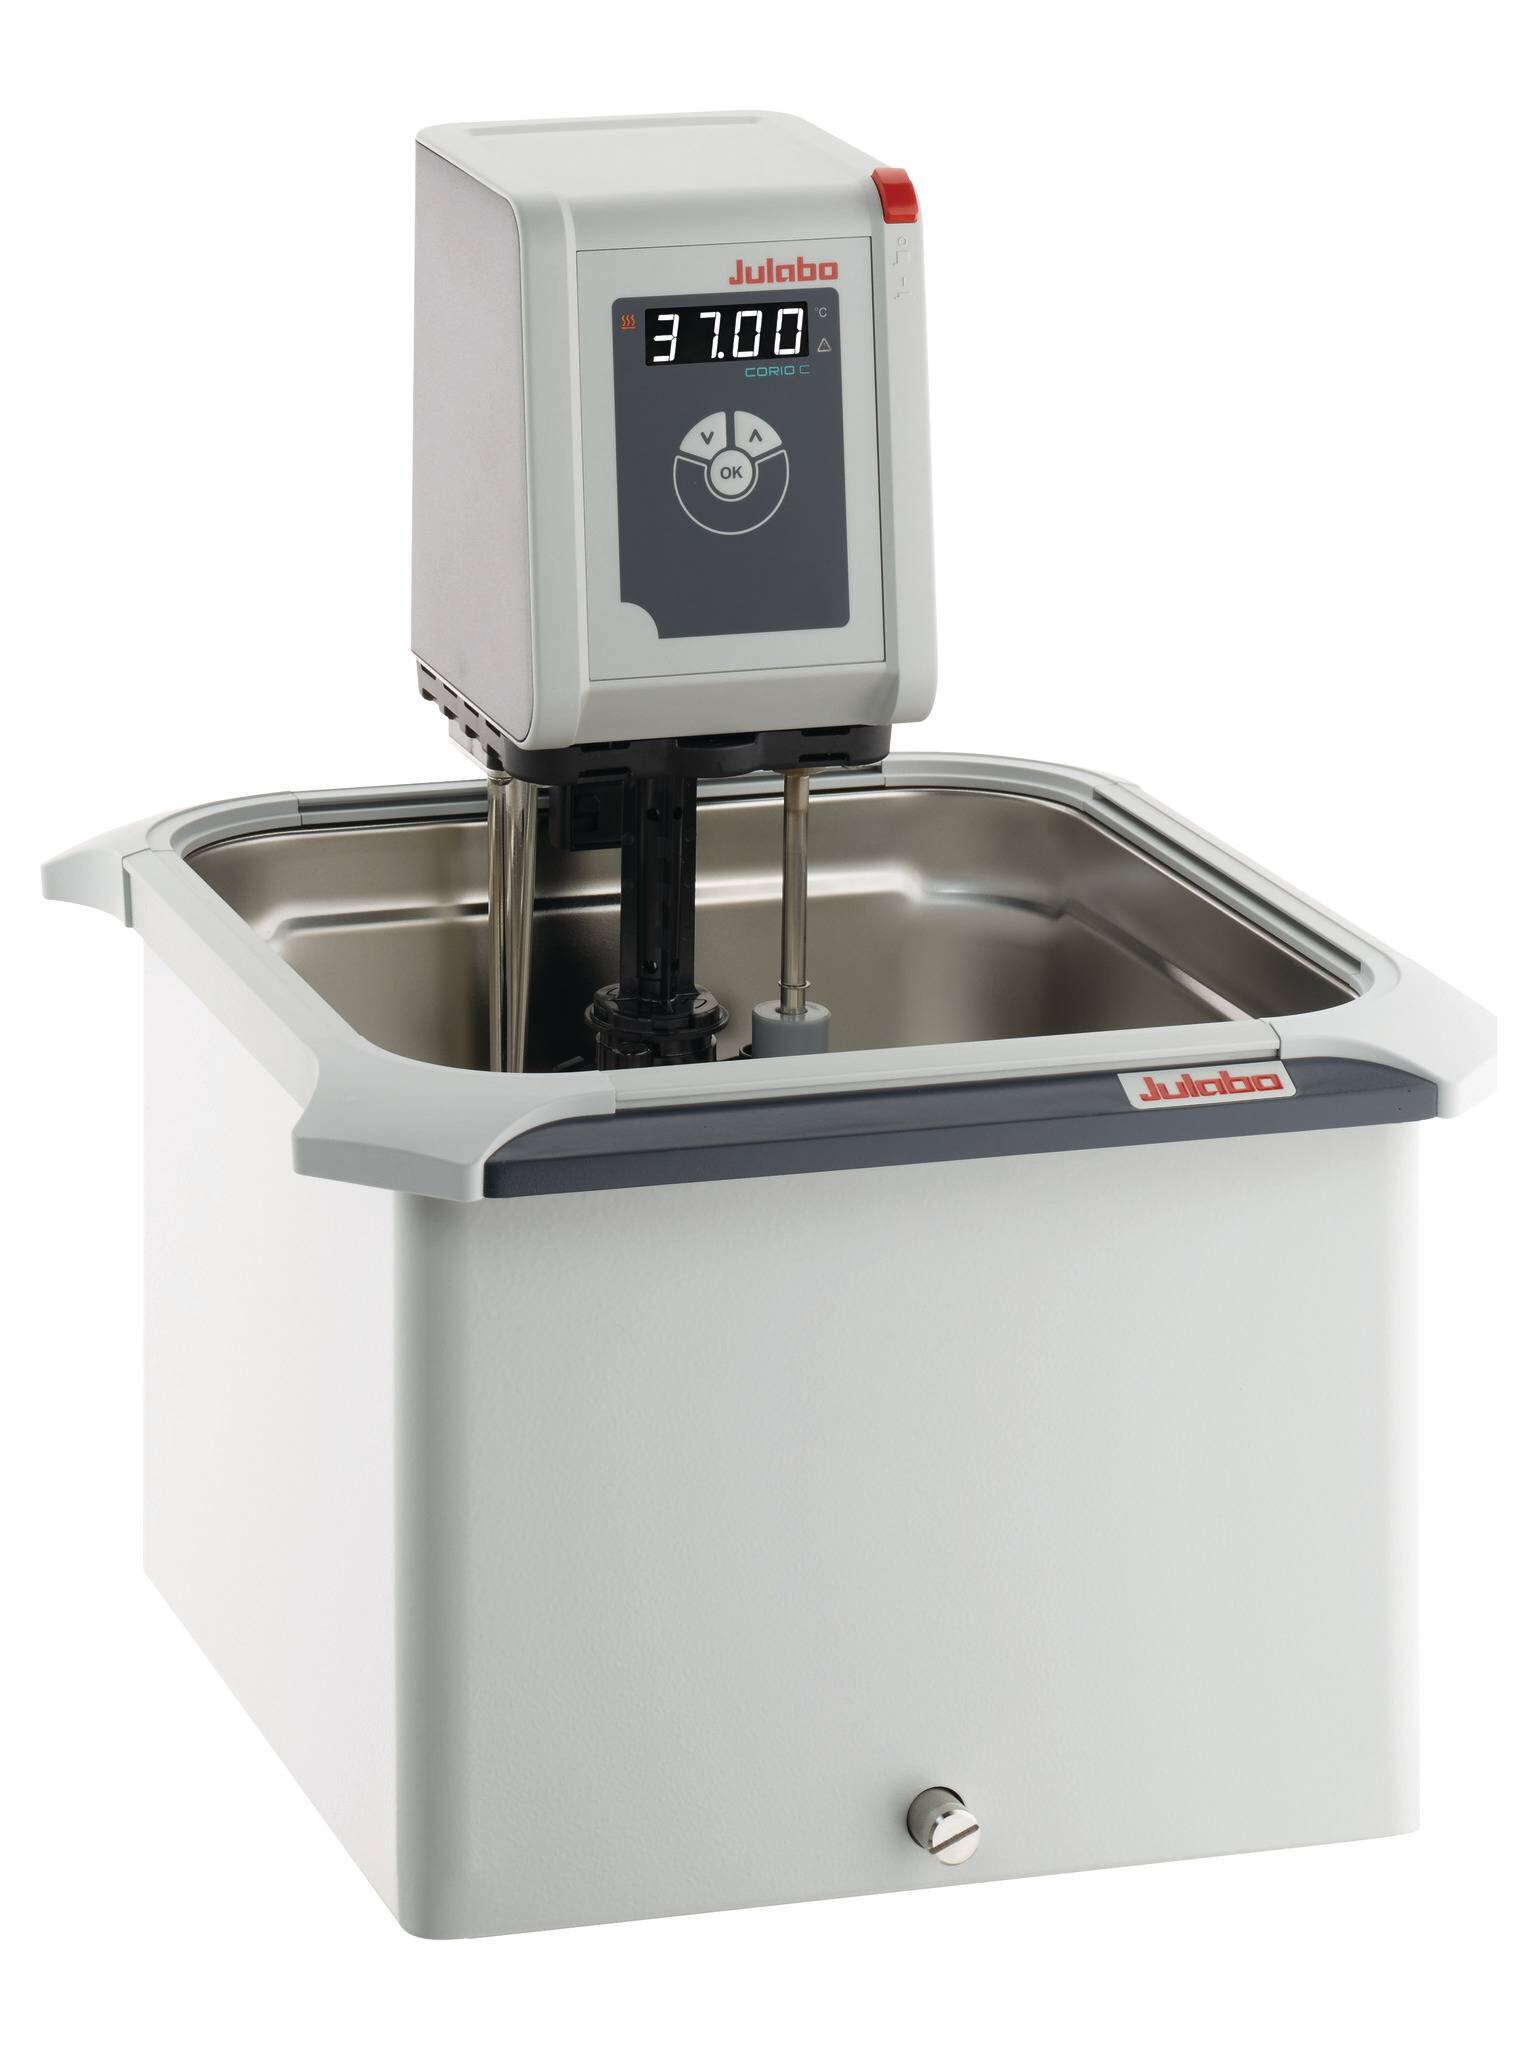 Open heating bath circulator with stainless steel bath tank CORIO C-B17 from JULABO view 3